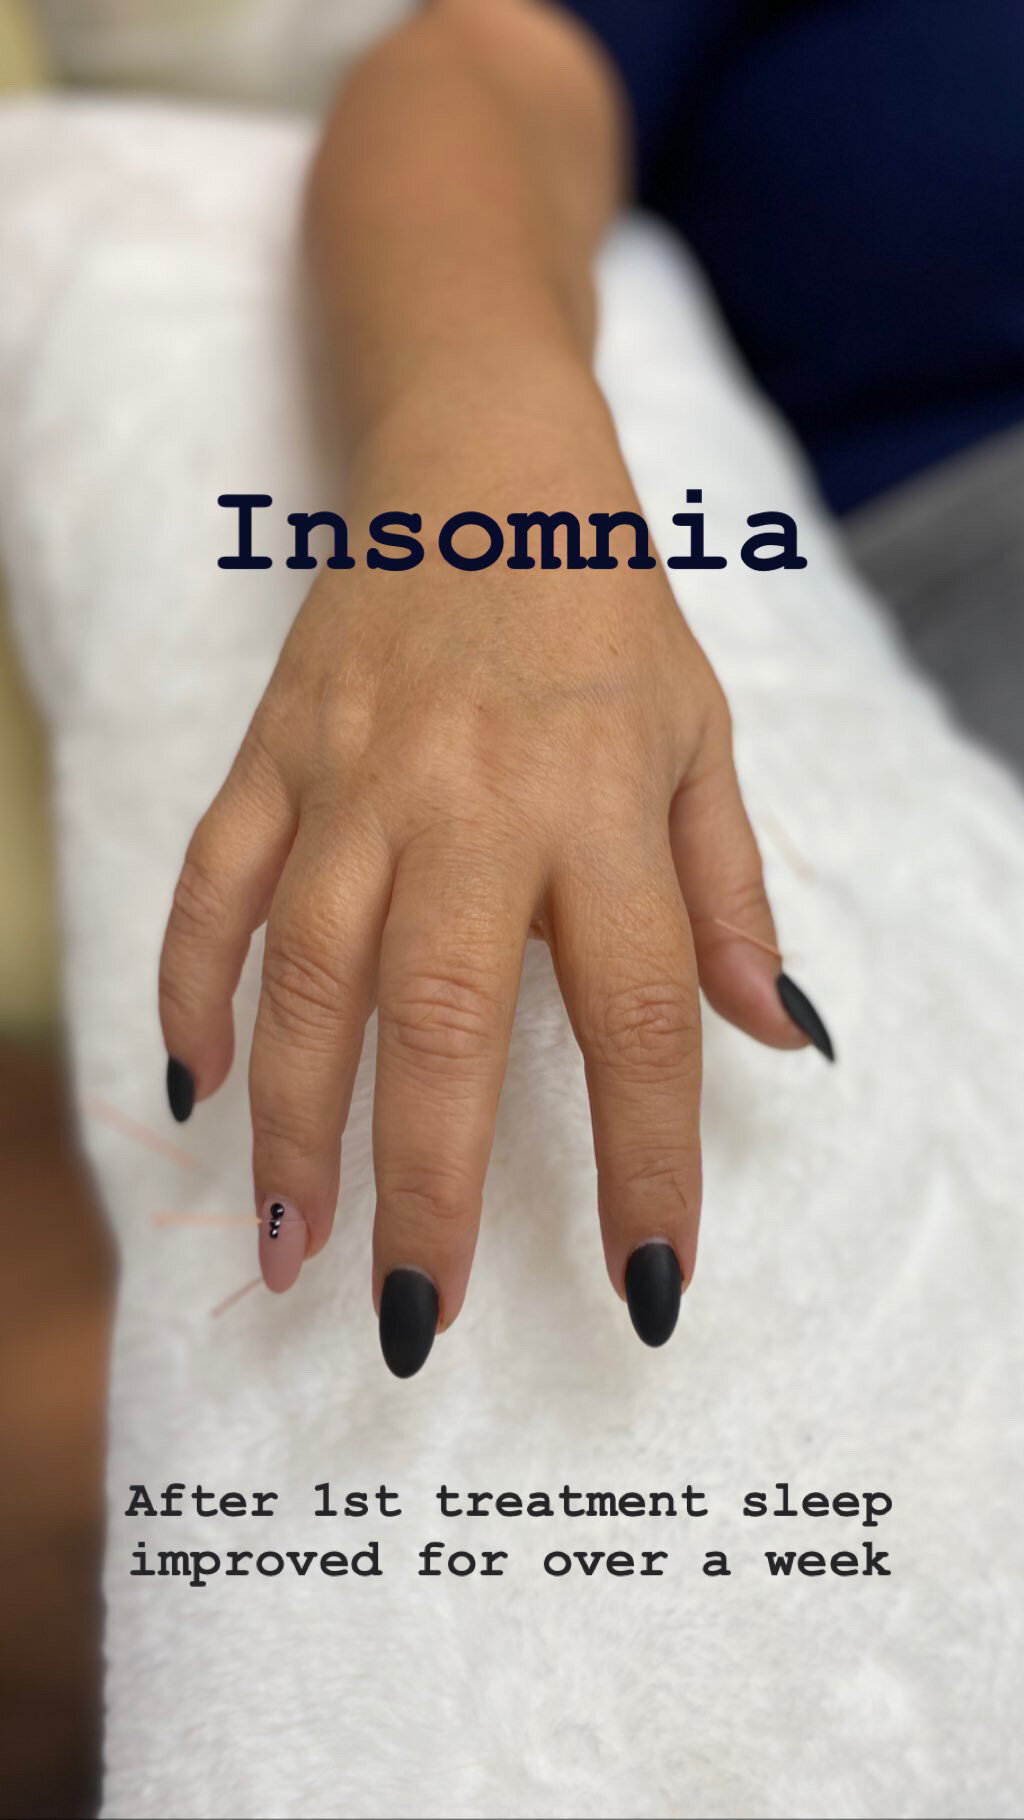  SuJok acupuncture in Vancouver used for treating Insomnia. Patient’s treatment resulted in the ability to sleep after one treatment.  